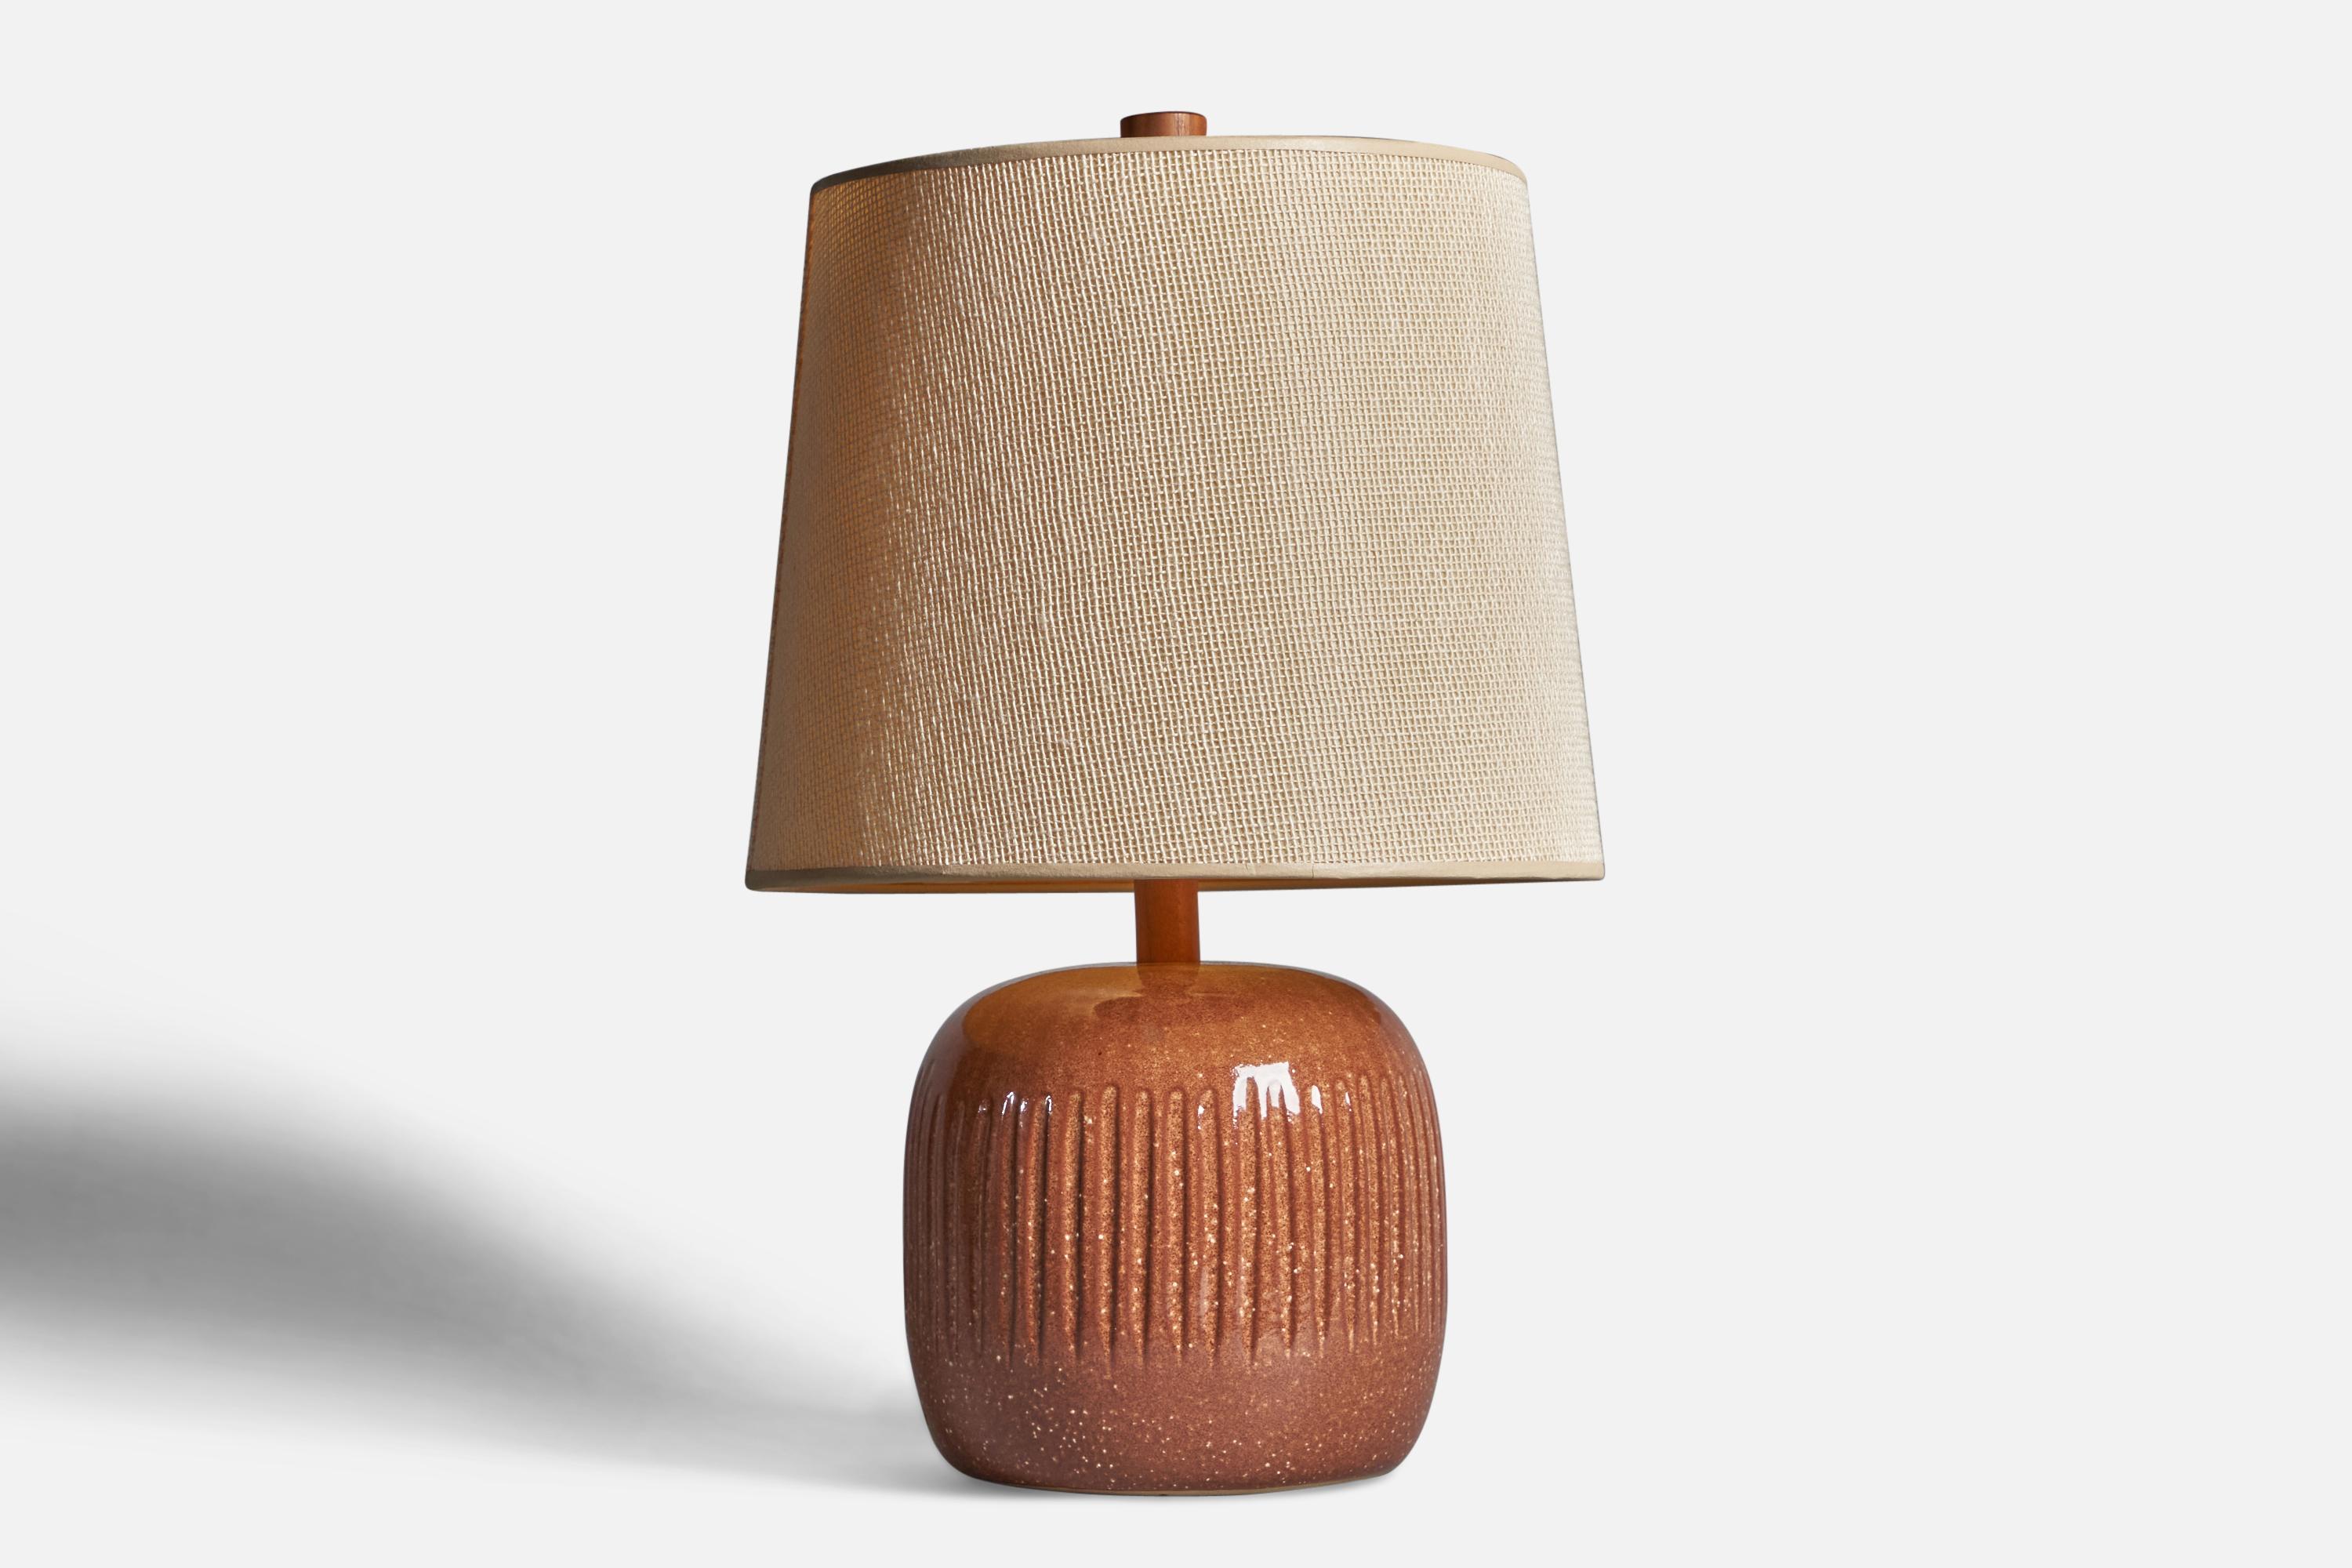 An orange-glazed ceramic and table lamp designed by Jane & Gordon Martz and produced by Marshall Studios, USA, 1960s.

Dimensions of Lamp (inches): 11.5” H x 8” Diameter
Dimensions of Shade (inches): 10